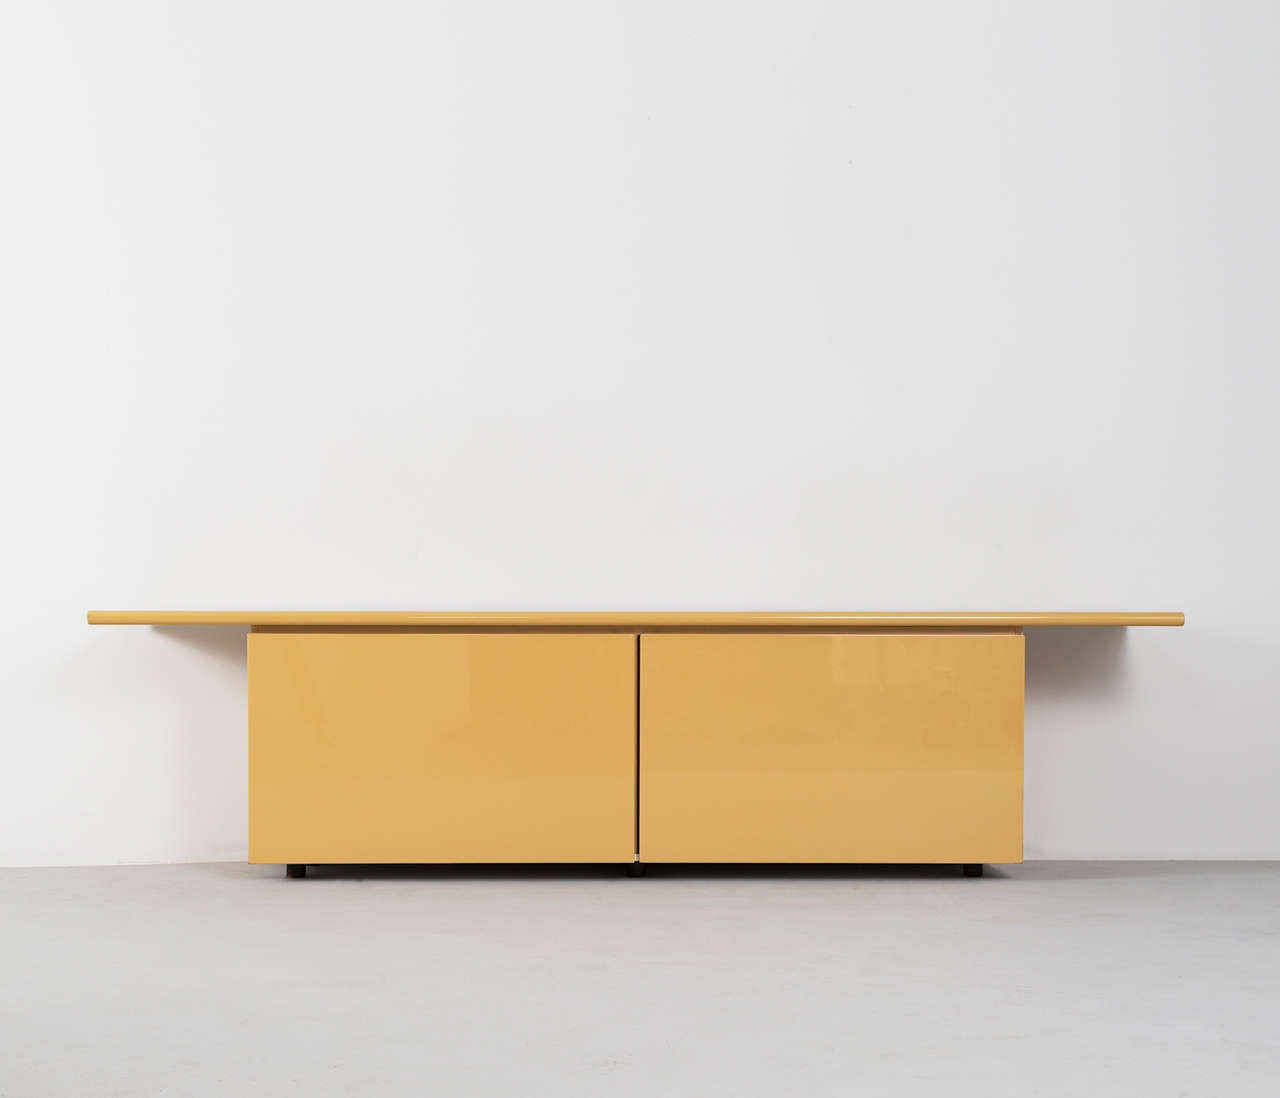 Stunning italian credenza with oversized top in high gloss pastel yellow, designed by Giotto Stoppino. The sideboard is provided with an innovated design, with roll doors that pivot for access to four drawers and various shelves.

Elegant